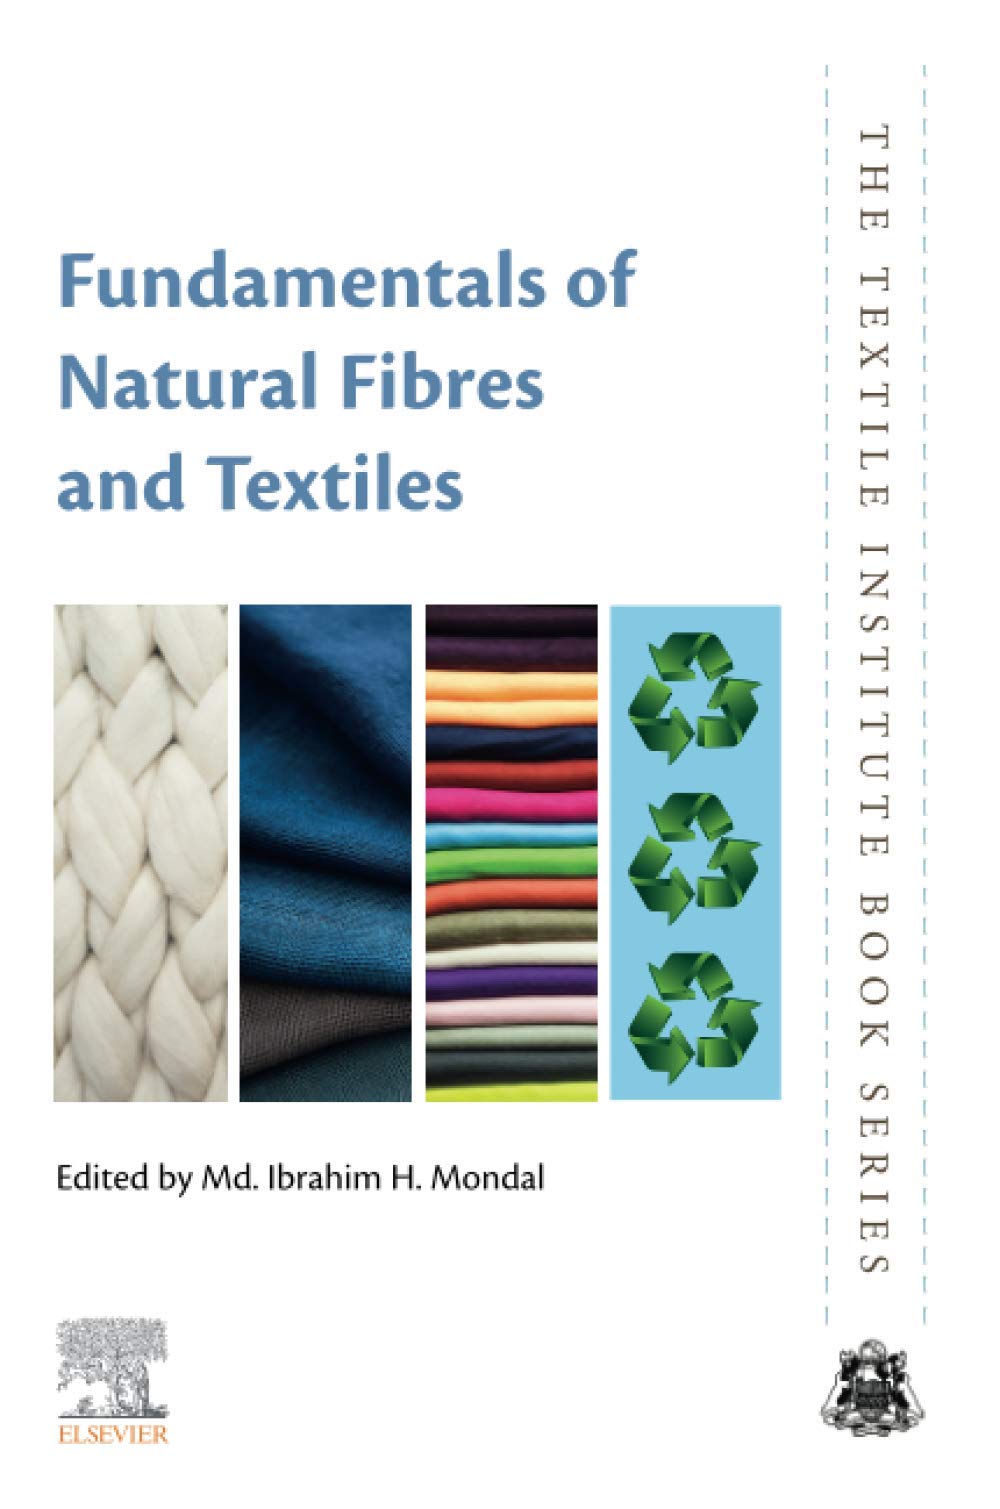 Fundamentals of Natural Fibres and Textiles (The Textile Institute Book Series)